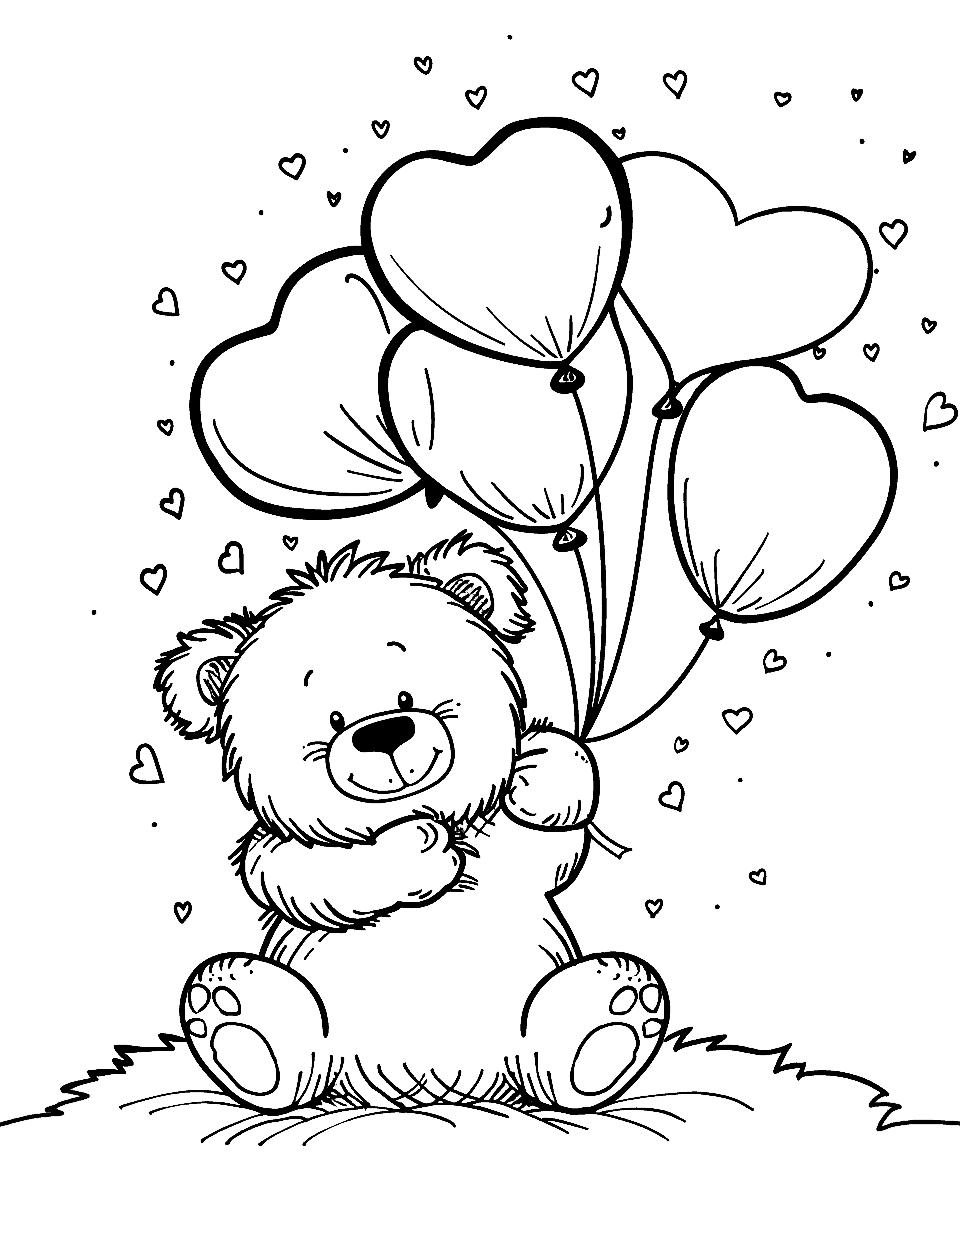 Valentine Teddy Bear Love Coloring Page - A teddy bear surrounded by heart-shaped balloons in celebration of Valentine’s Day.